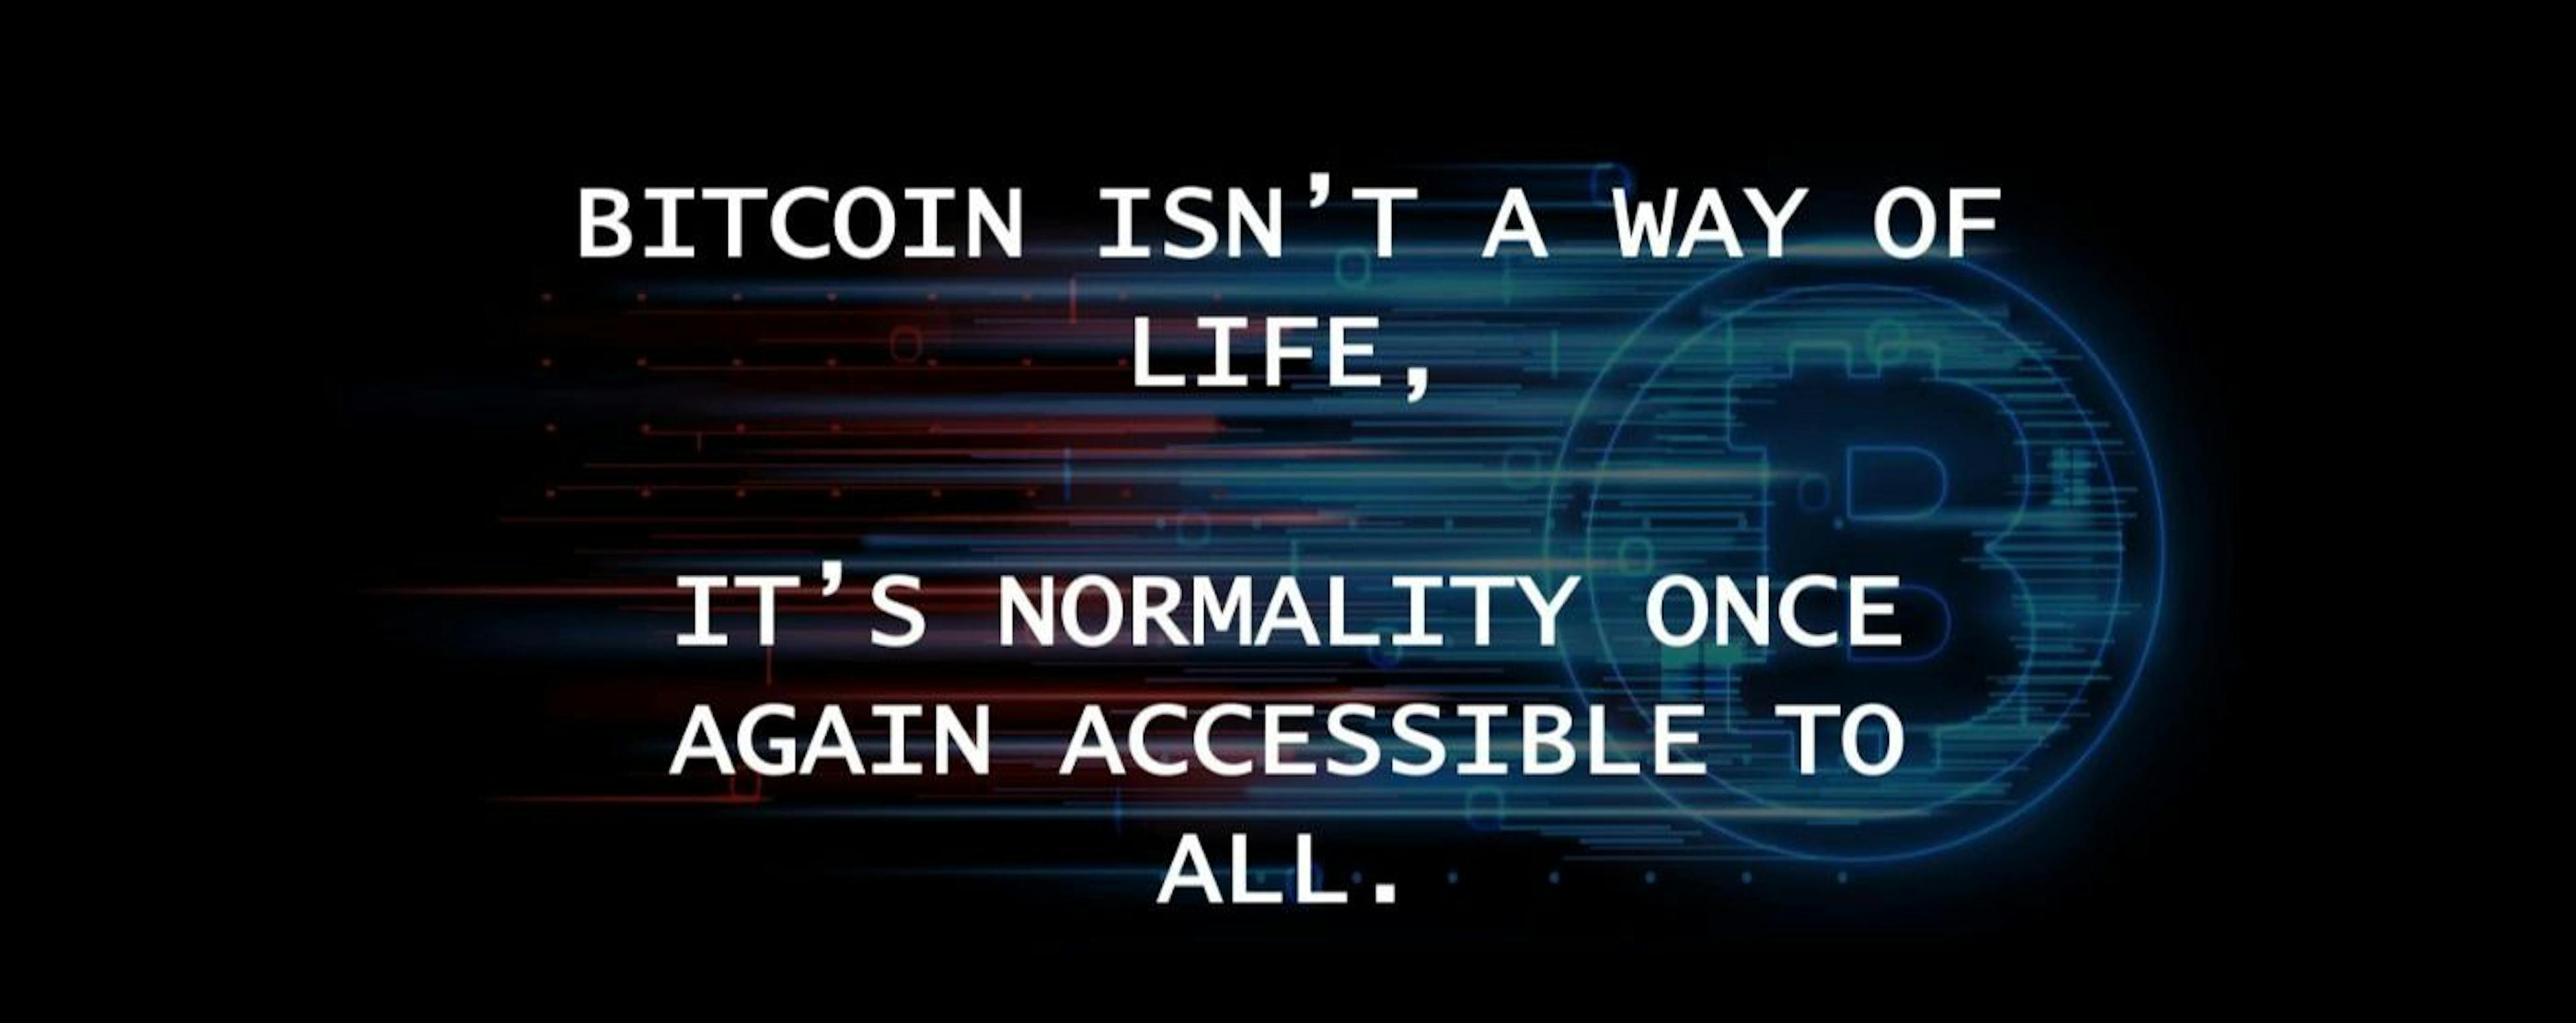 featured image - Stop Thinking Bitcoin Is a Way of Life, It's Our Best Option for Living Life on Our Own Terms